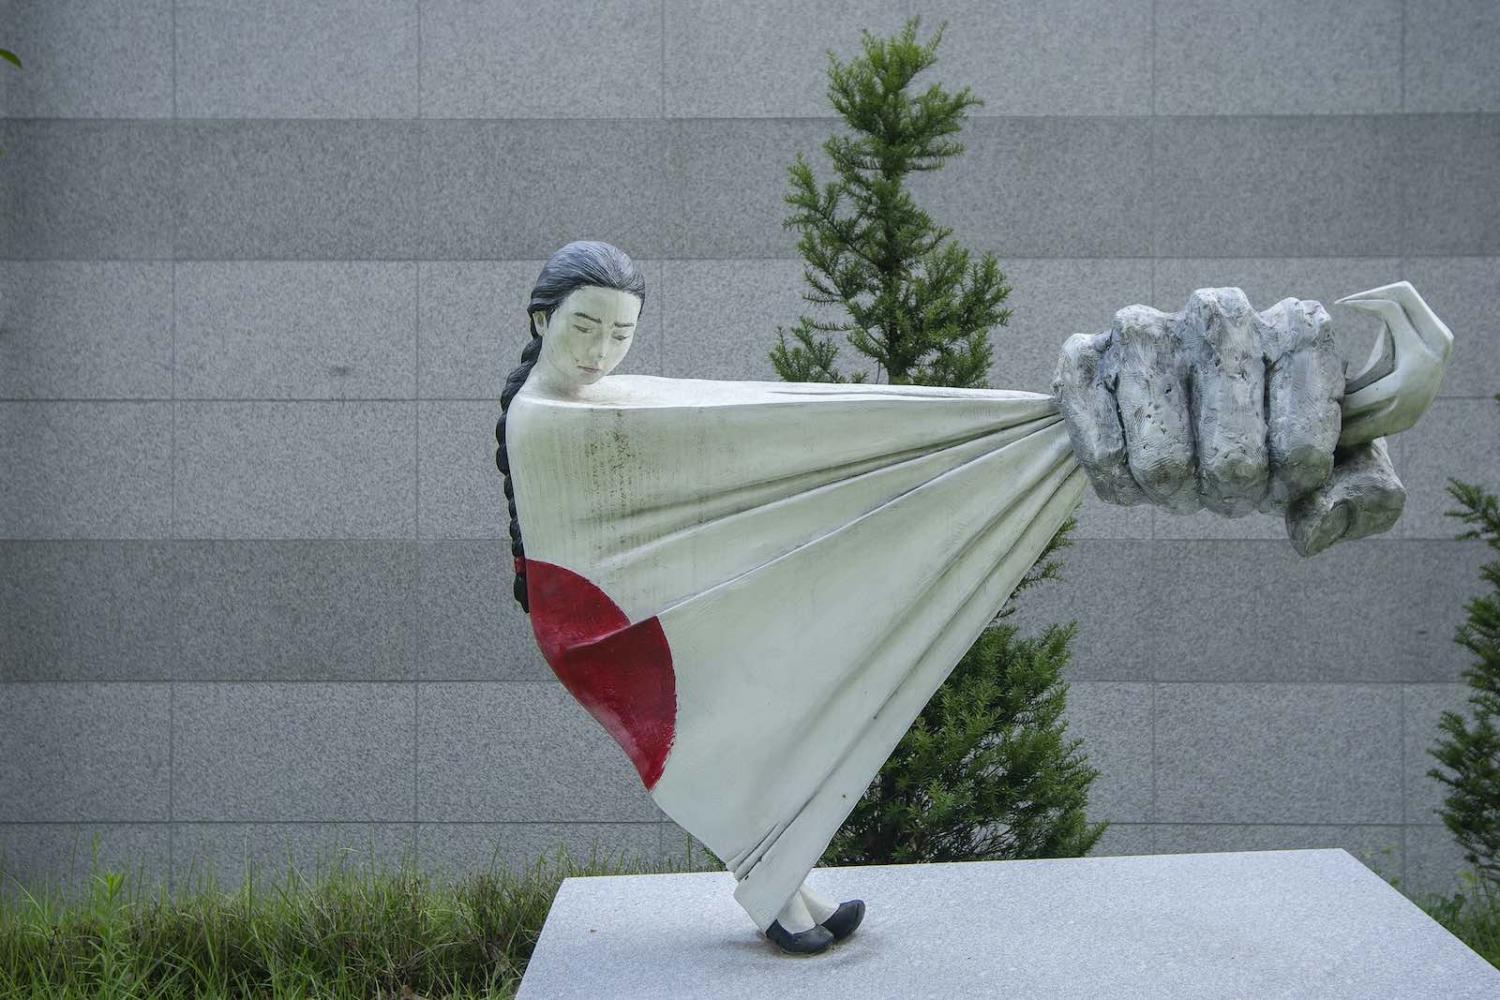 A sculpture to memorialise the “comfort women” of the Second World War at Memorial Park of Sharing House in Gwangju, South Korea (Seung-il Ryu/NurPhoto via Getty Images)